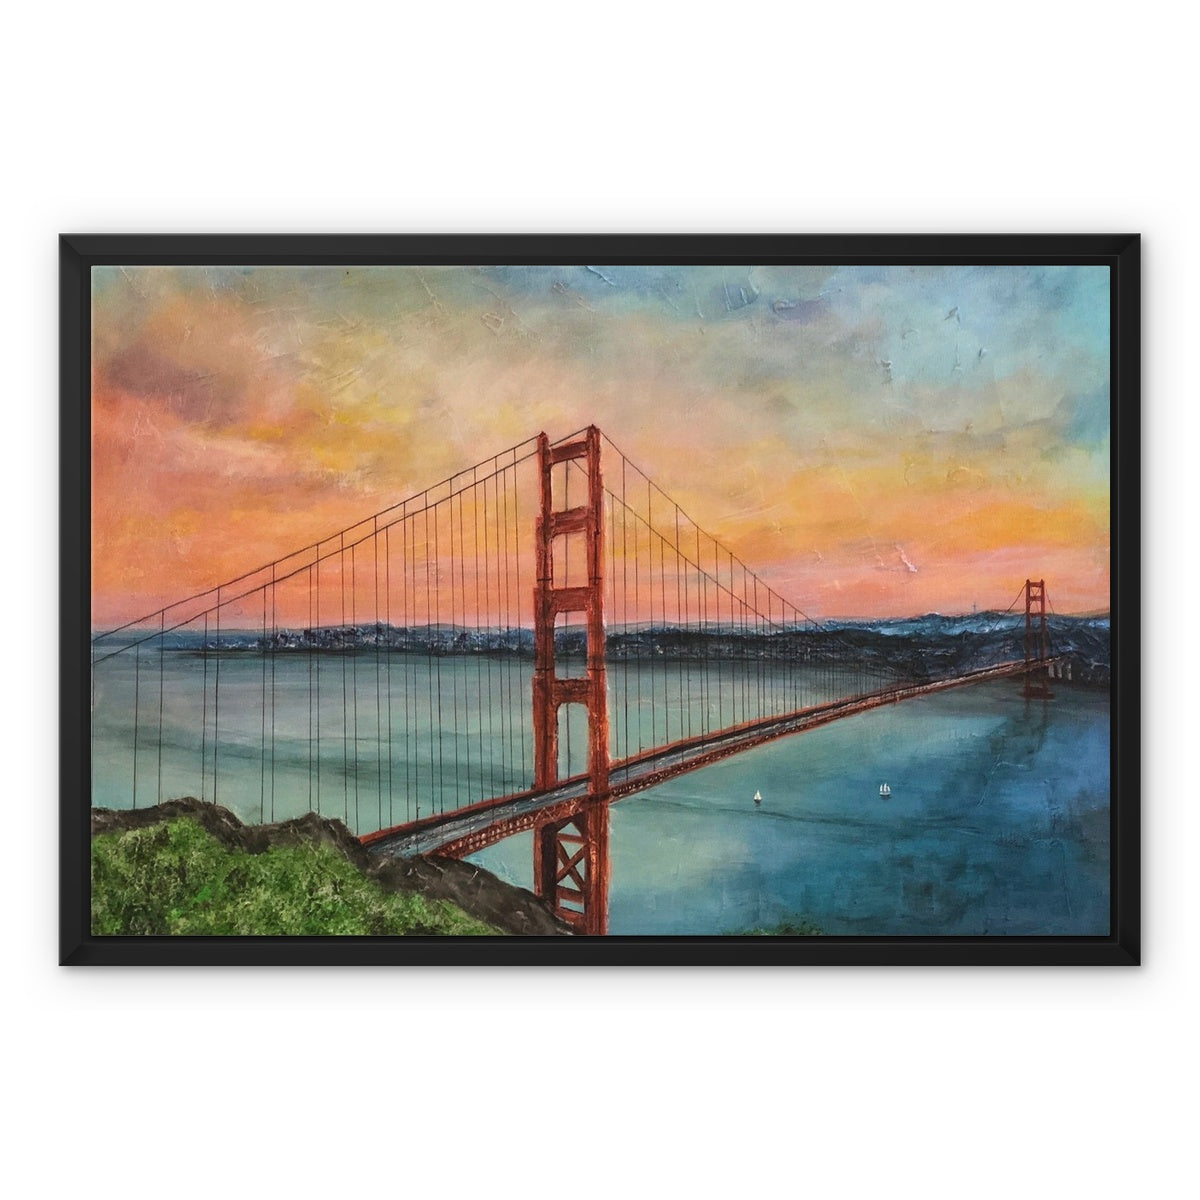 The Golden Gate Bridge Painting | Framed Canvas From Scotland-Floating Framed Canvas Prints-World Art Gallery-24"x18"-Black Frame-Paintings, Prints, Homeware, Art Gifts From Scotland By Scottish Artist Kevin Hunter